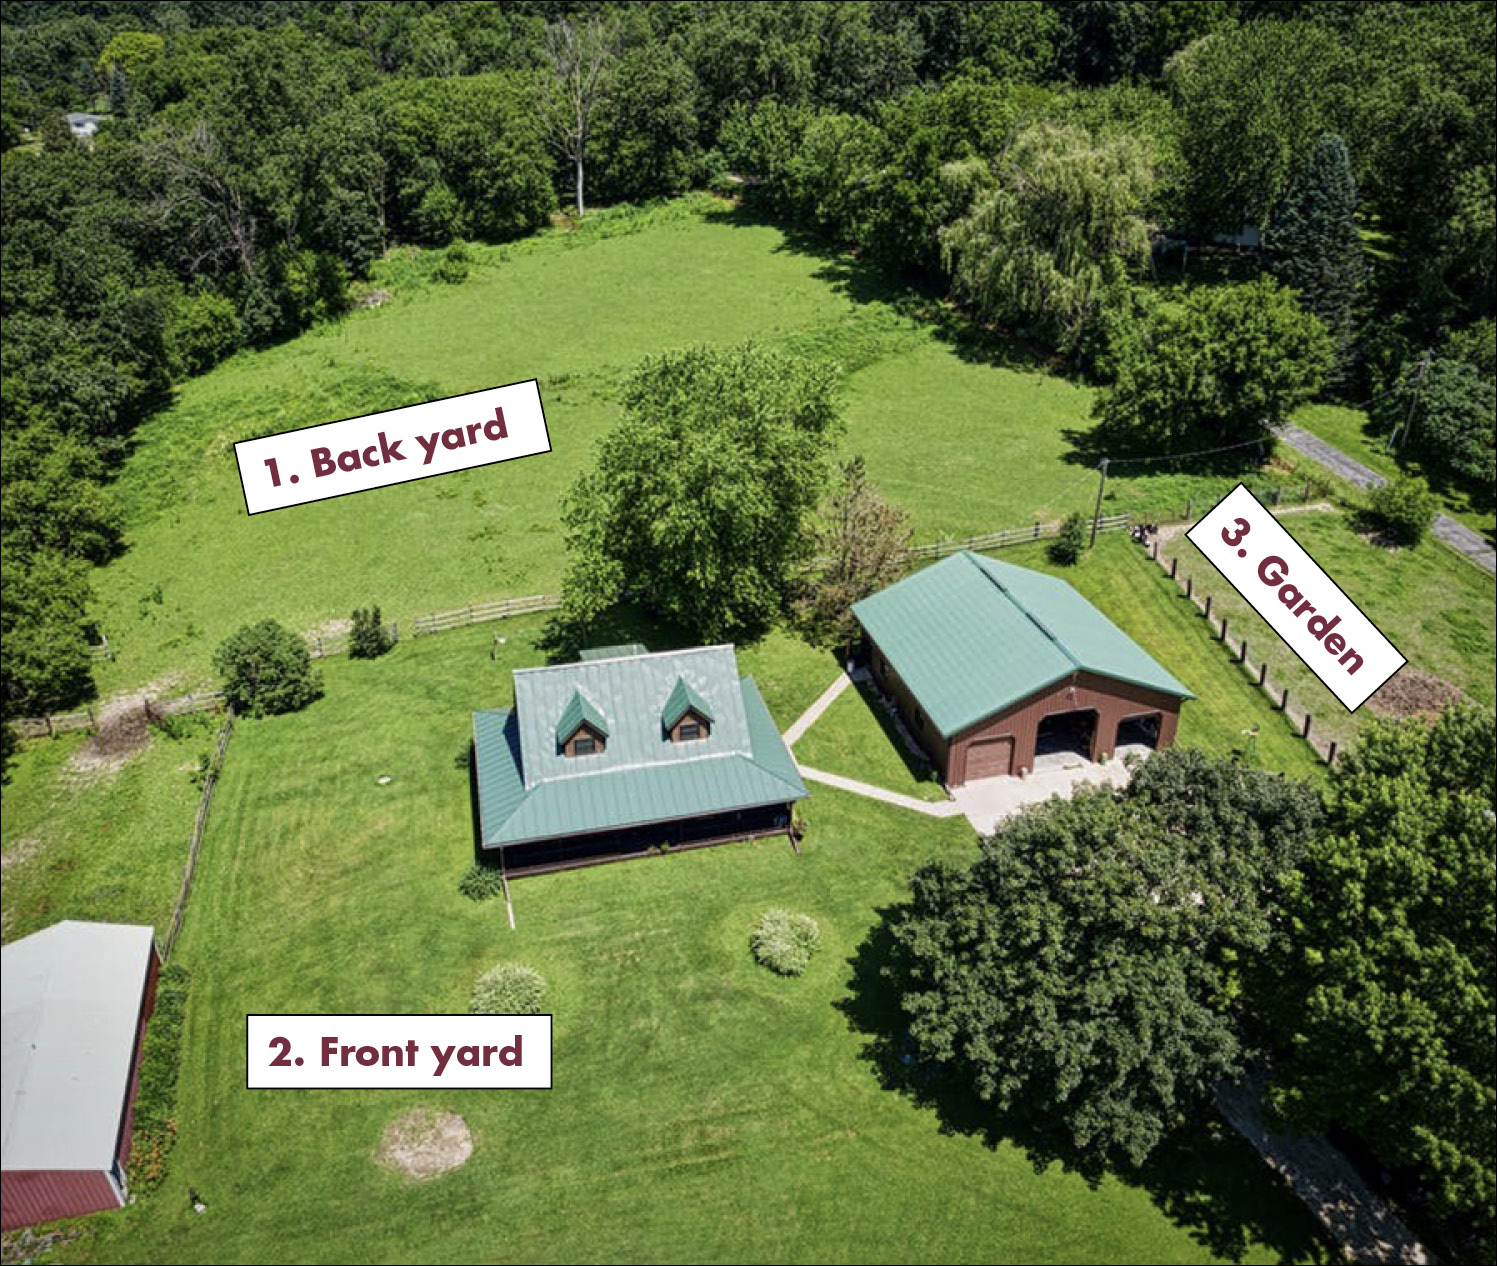 Aerial view of a property divided into three sections: back yard, front yard, and garden.